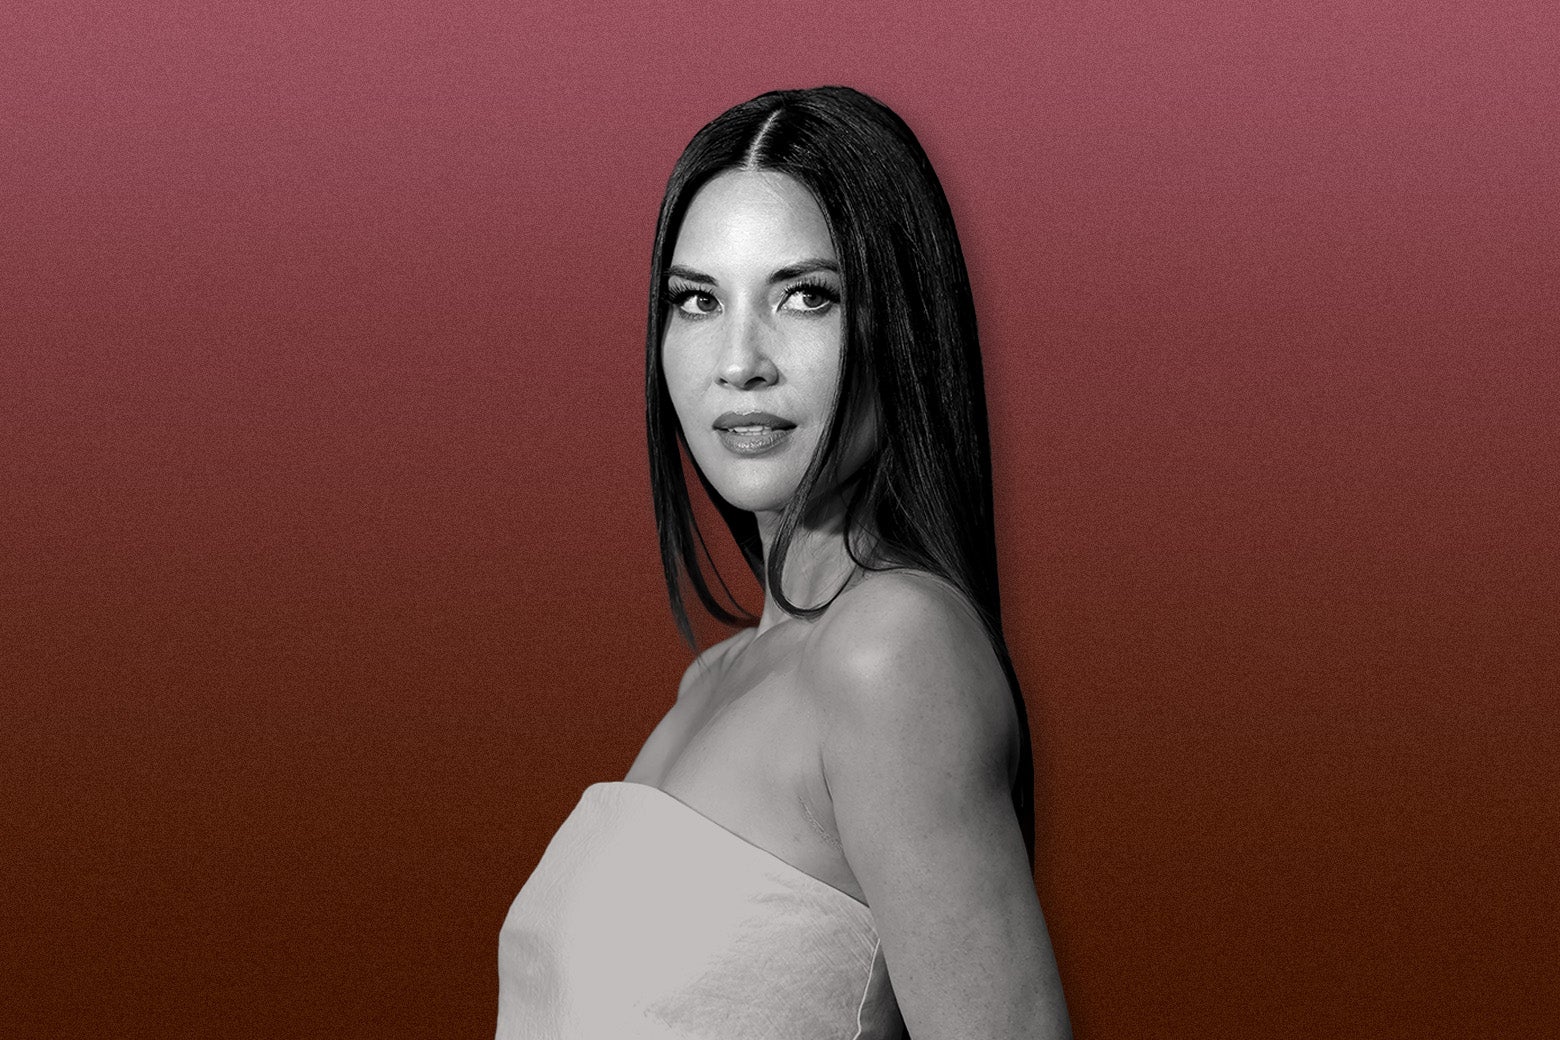 Olivia Munn in a white dress, against a maroon background.